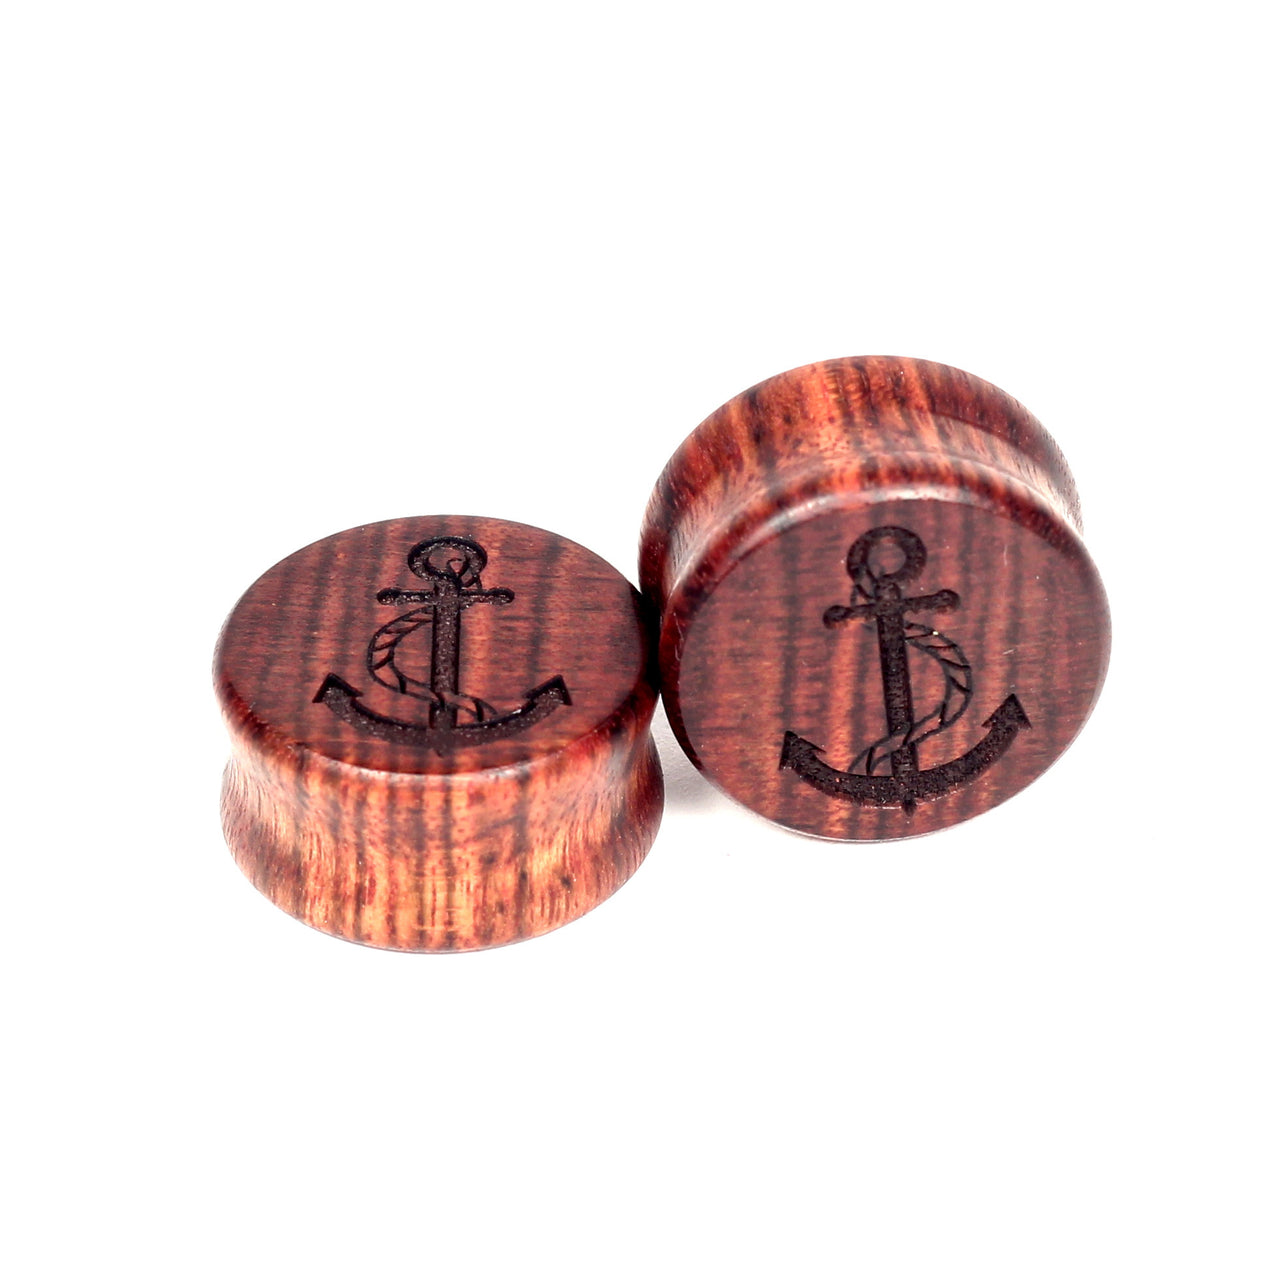 Anchors-CH - BC Plugs 